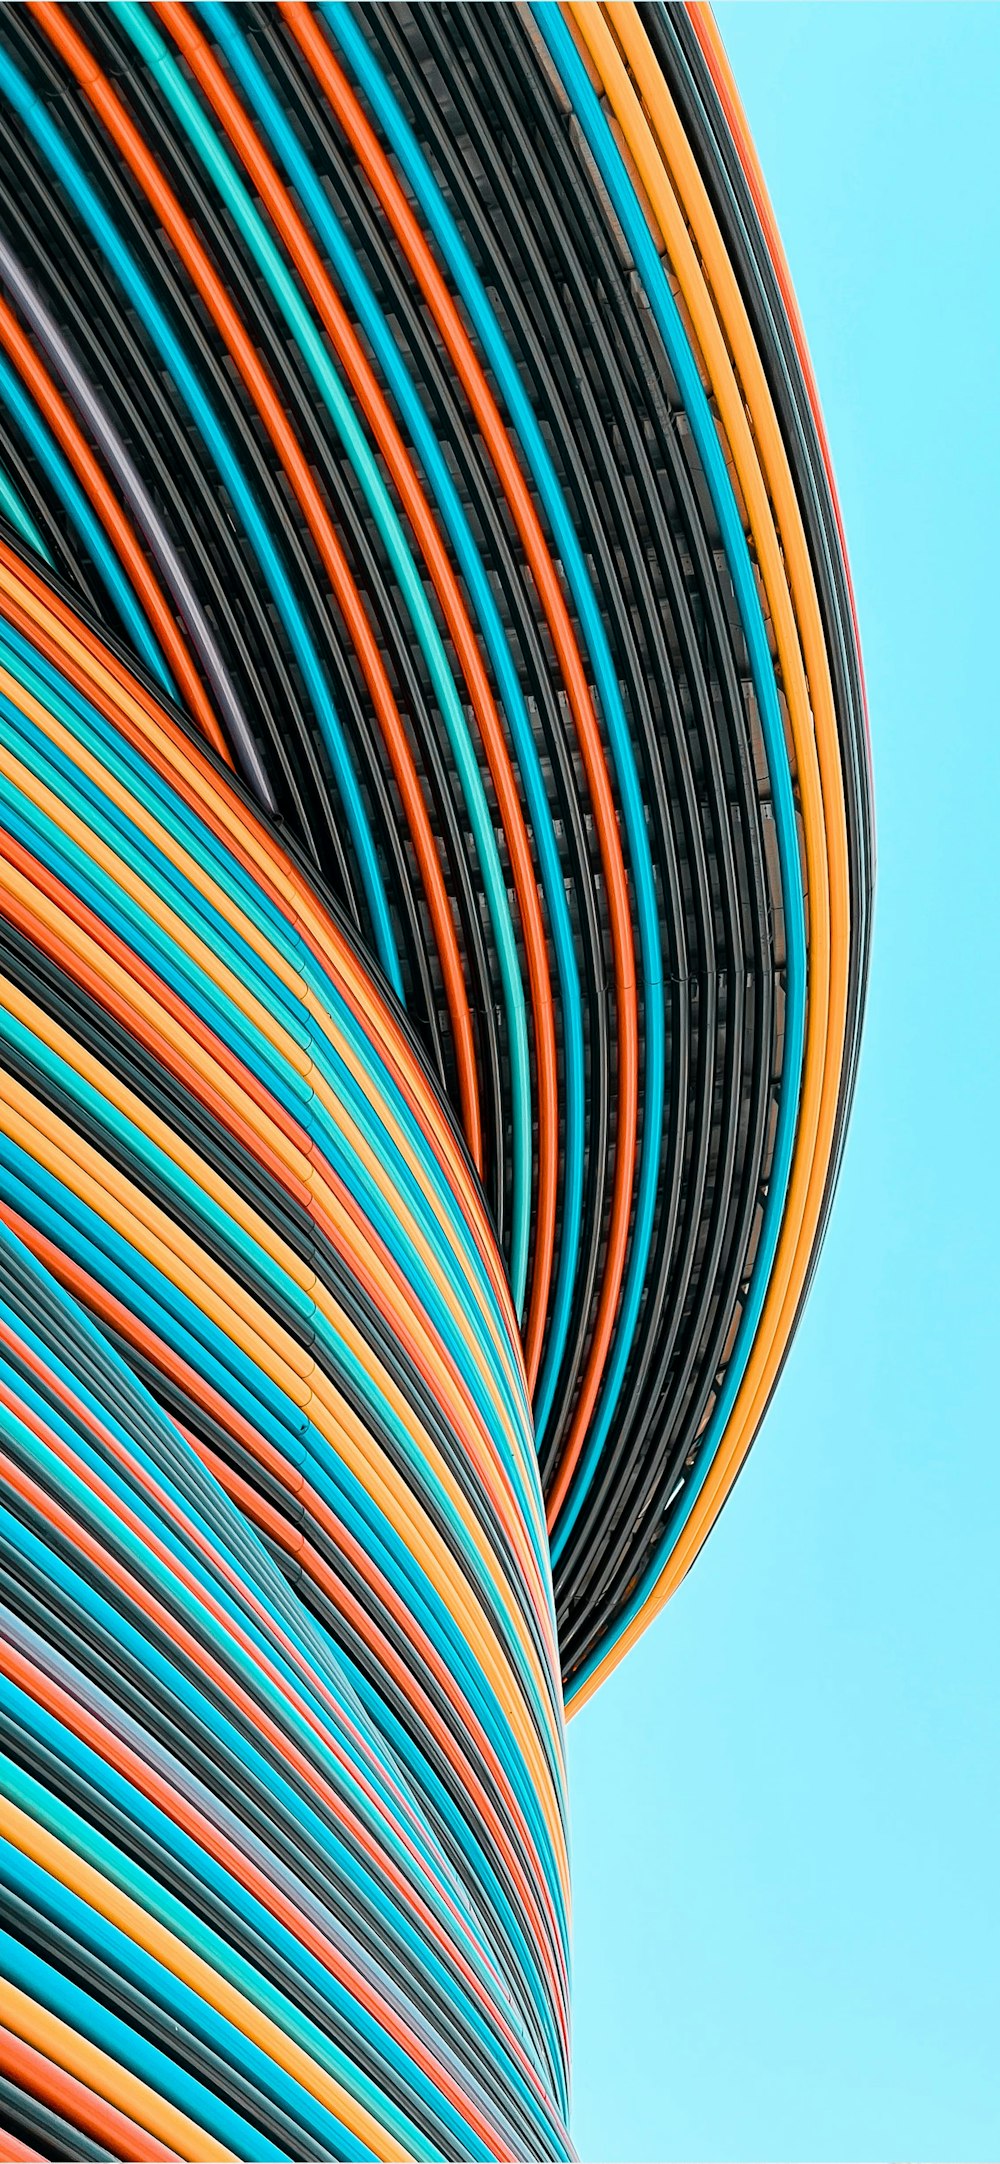 a stack of colorful wires against a blue sky